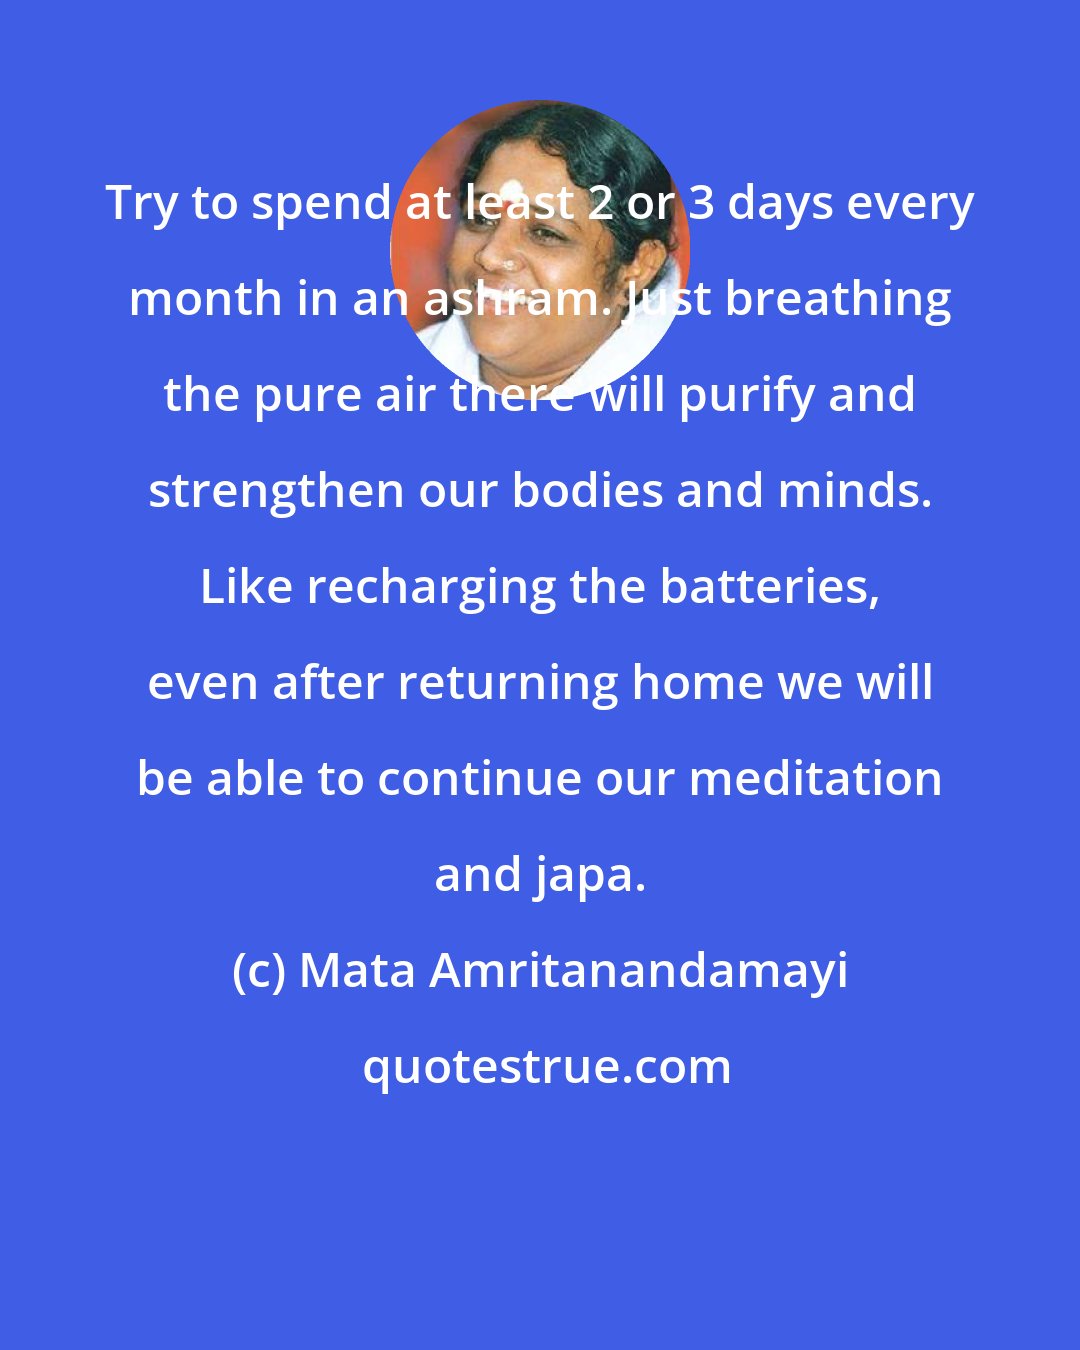 Mata Amritanandamayi: Try to spend at least 2 or 3 days every month in an ashram. Just breathing the pure air there will purify and strengthen our bodies and minds. Like recharging the batteries, even after returning home we will be able to continue our meditation and japa.